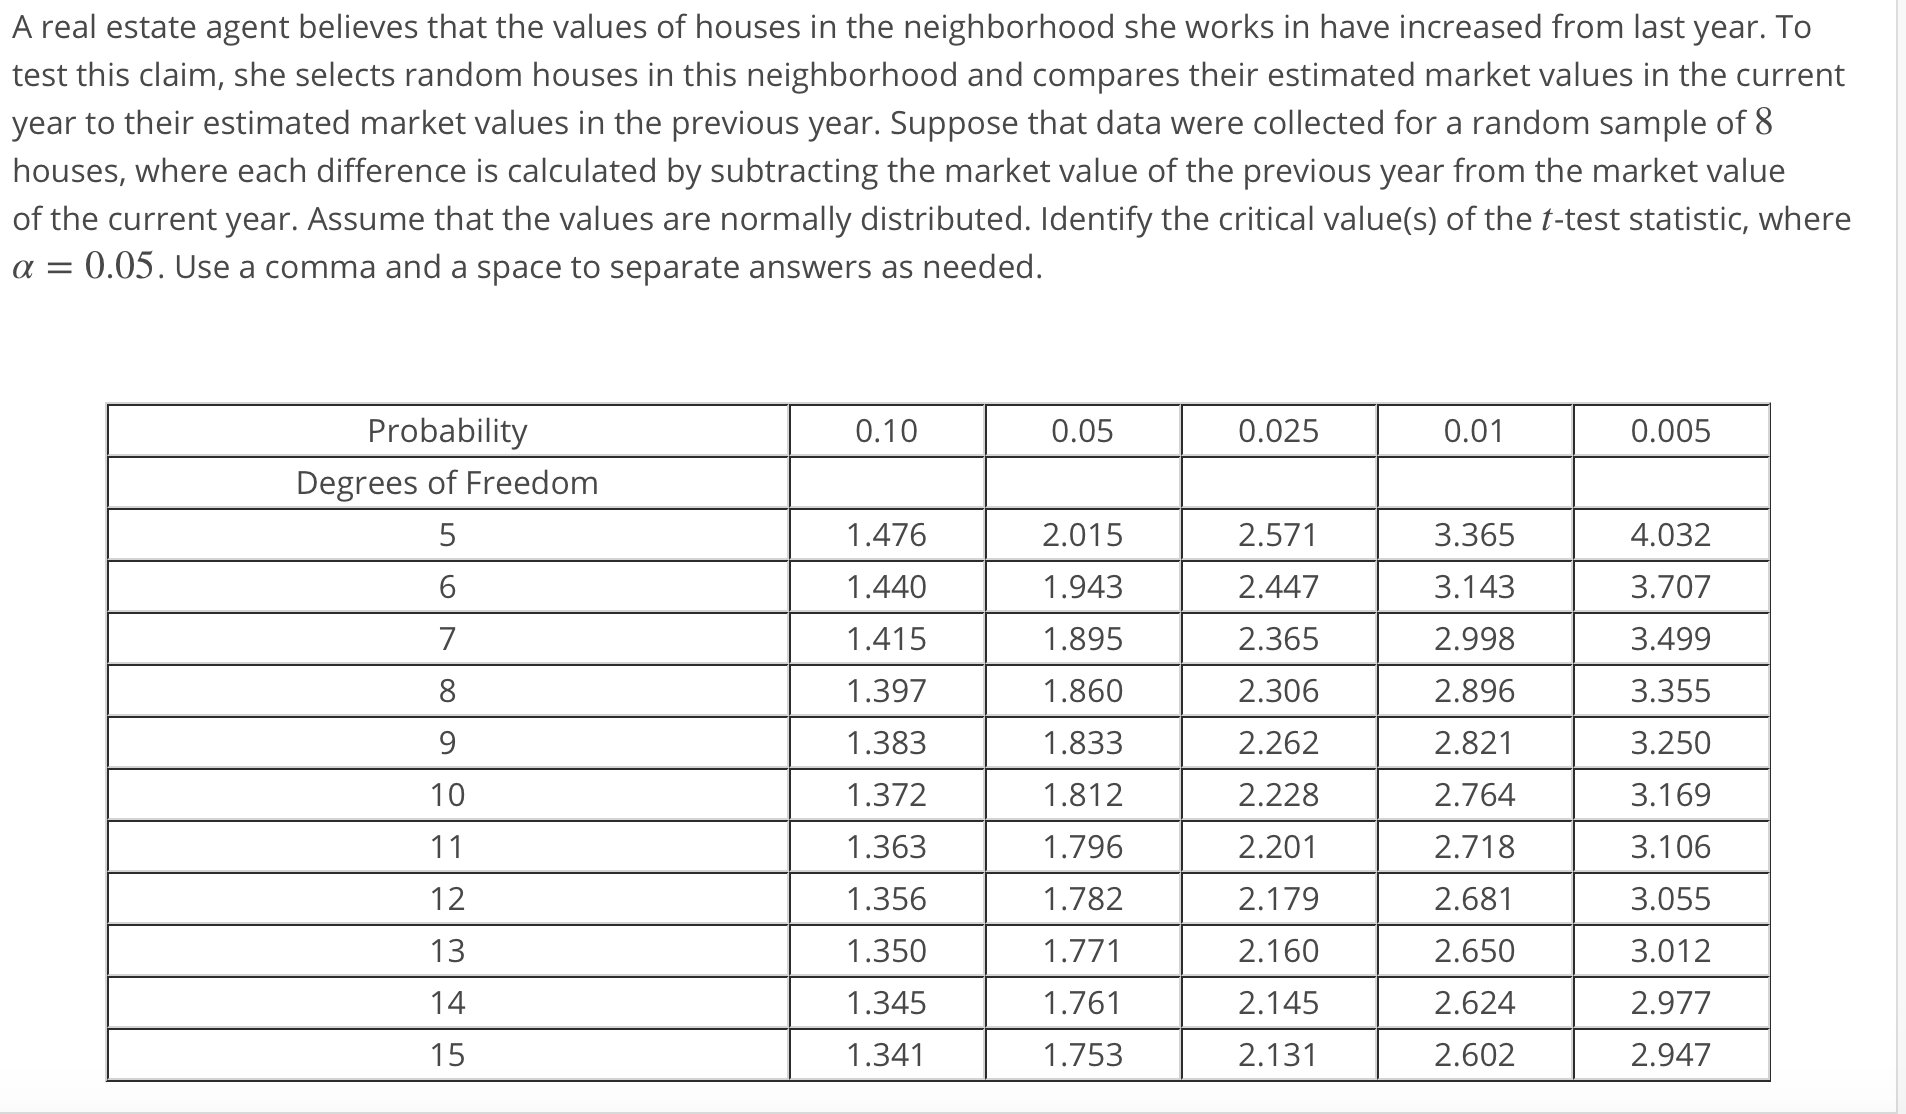 A real estate agent believes that the values of houses in the neighborhood she works in have increased from last year. To
test this claim, she selects random houses in this neighborhood and compares their estimated market values in the current
year to their estimated market values in the previous year. Suppose that data were collected for a random sample of 8
houses, where each difference is calculated by subtracting the market value of the previous year from the market value
of the current year. Assume that the values are normally distributed. Identify the critical value(s) of the t-test statistic, where
α-0.05. Use a comma and a space to separate answers as needed
0.01
Probability
Degrees of Freedom
5
6
0.10
0.05
0.025
0.005
1.476
1.440
1.415
1.397
1.383
1.372
1.363
1.356
1.350
1.345
1.341
2.015
1.943
1.895
1.860
1.833
1.812
1.796
1.782
2.571
2.447
2.365
2.306
2.262
2.228
2.201
2.179
2.160
2.145
2.131
3.365
3.143
2.998
2.896
2.821
2.764
2.718
2.681
2.650
2.624
2.602
4.032
3.707
3.499
3.355
3.250
3.169
3.106
3.055
3.012
2.977
2.947
1.761
1.753
